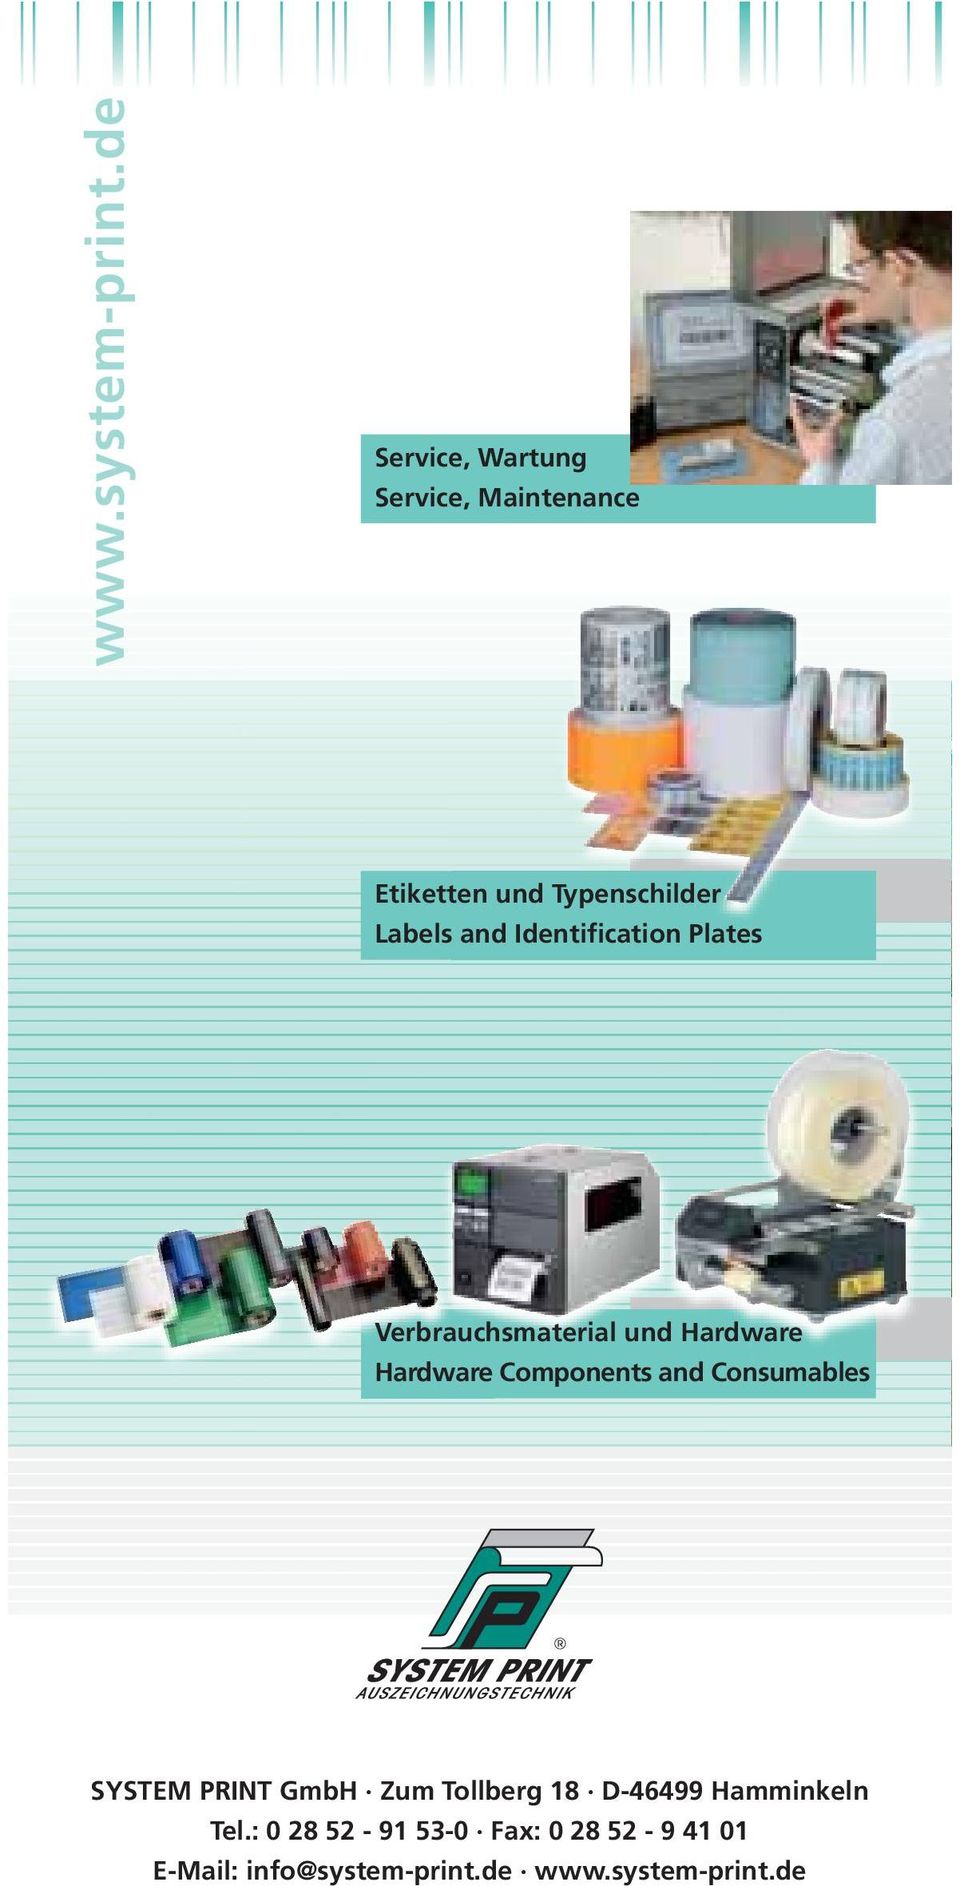 Identification Plates Verbrauchsmaterial und Hardware Hardware Components and